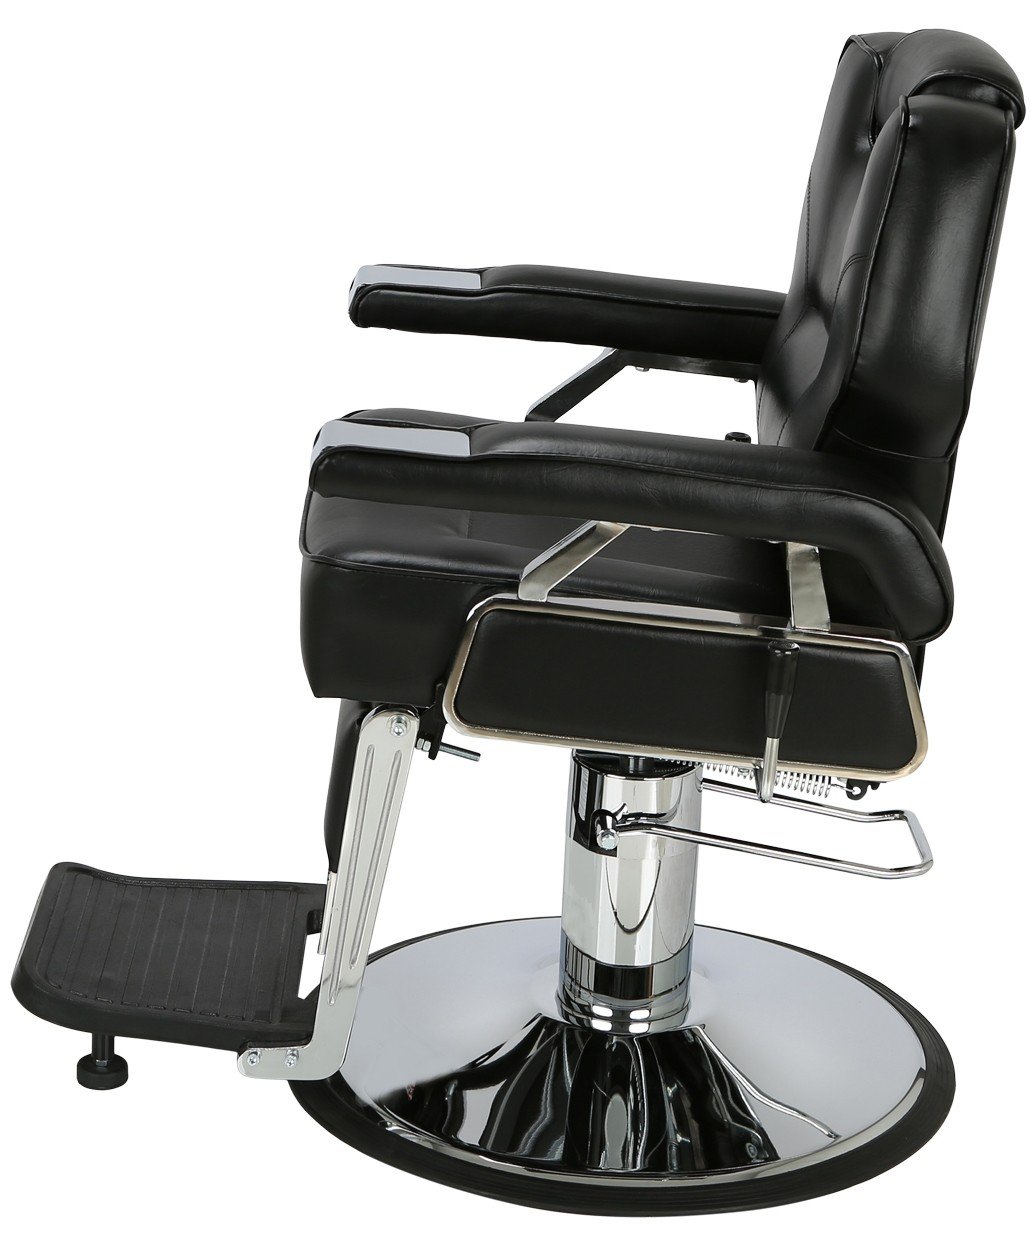 Set of 2 K.O. Professional Barber Chairs